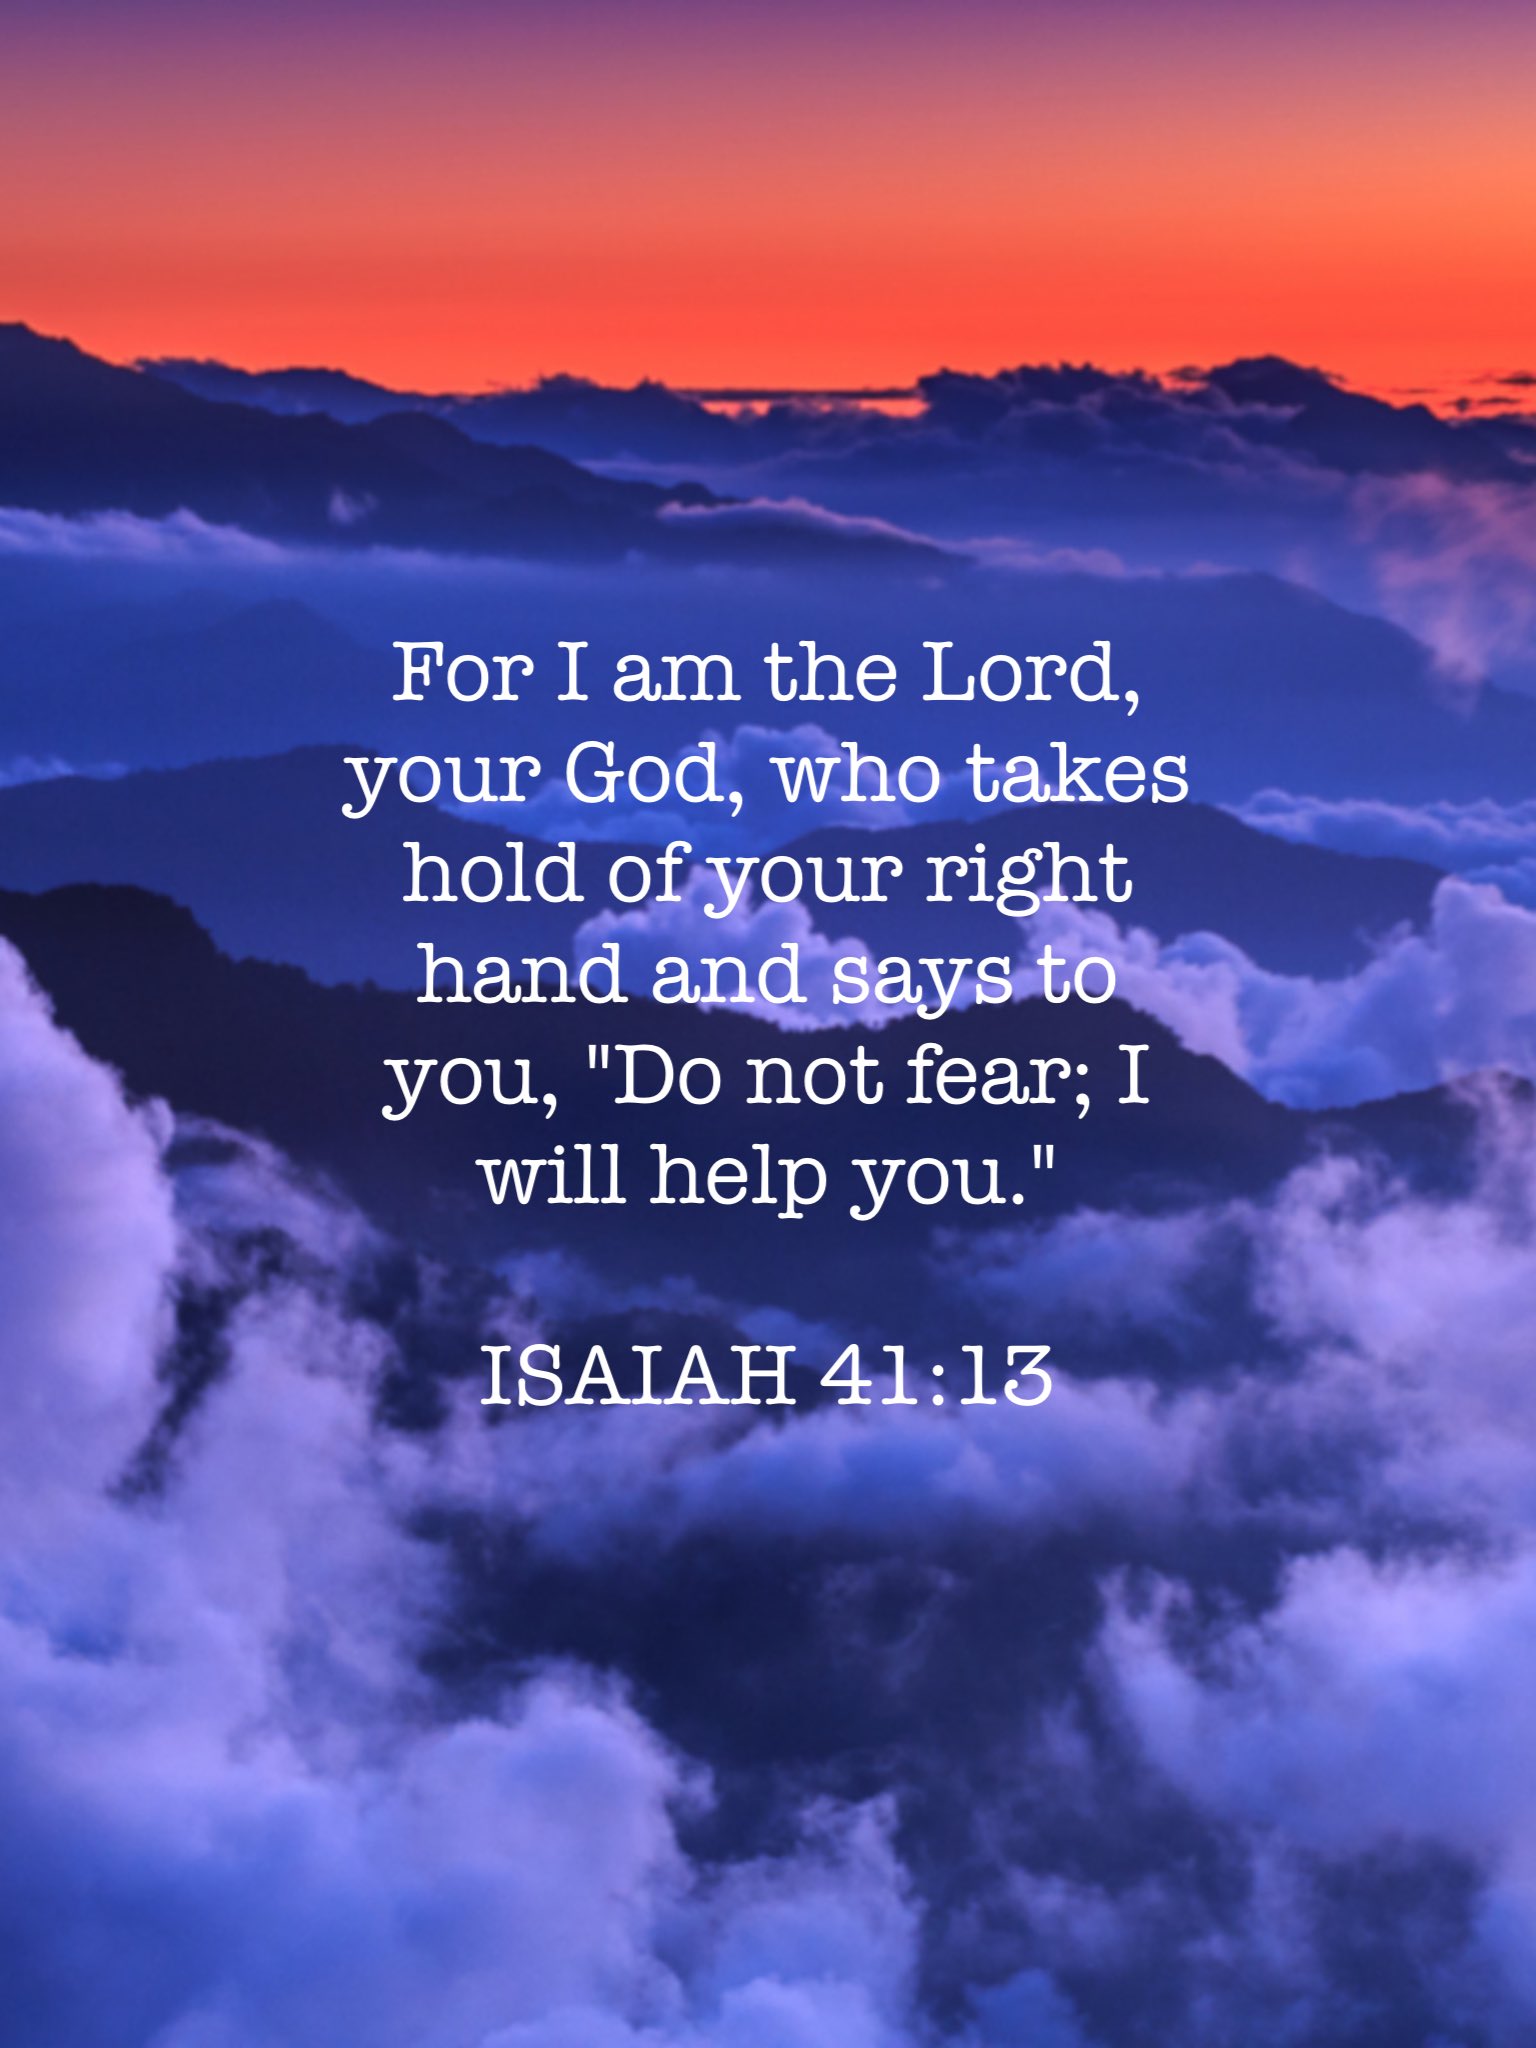 For I am the Lord, your God, who takes hold of your right hand and says to yoU, "Do not fear; I will help you:' ISAIAH 41.13